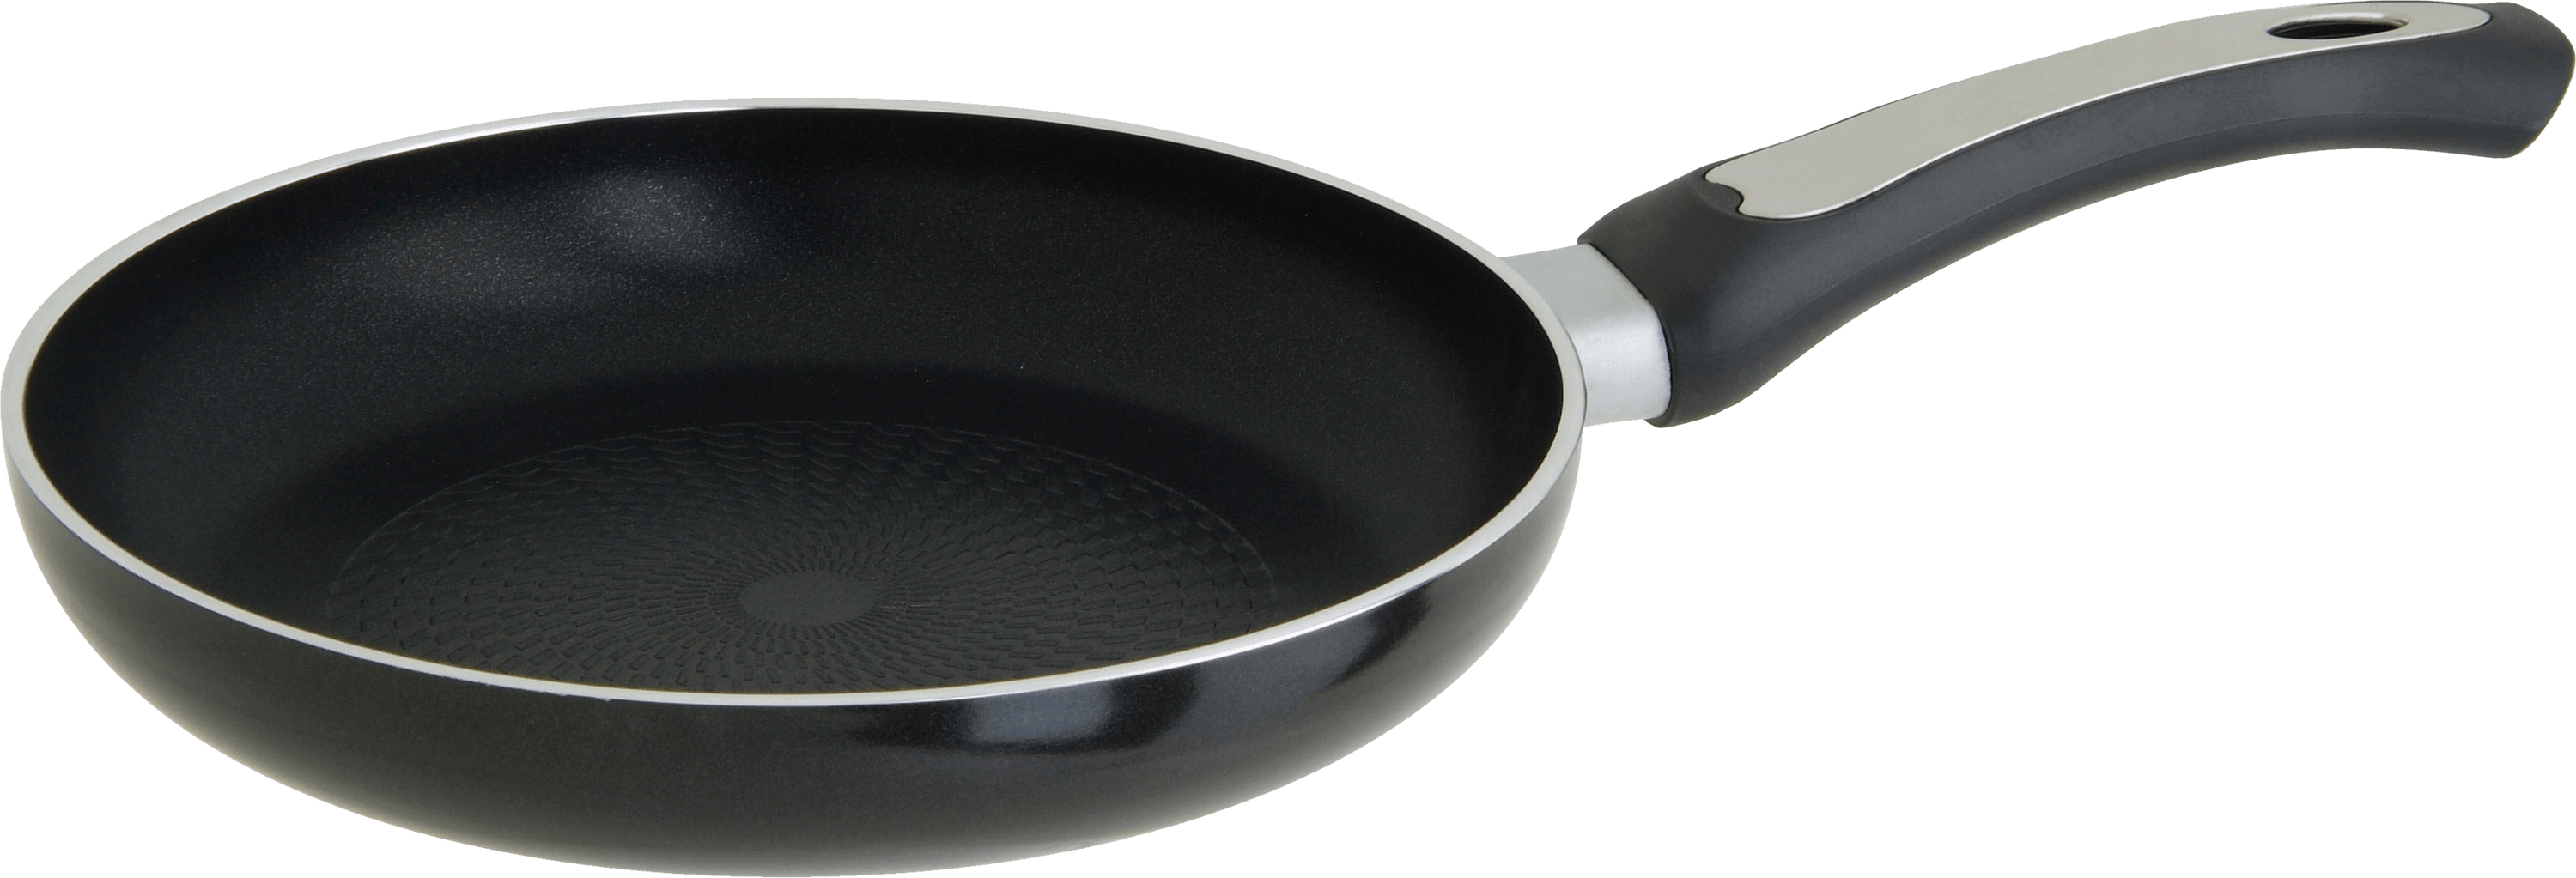 Bowl Pan Grill Steel Breads PNG